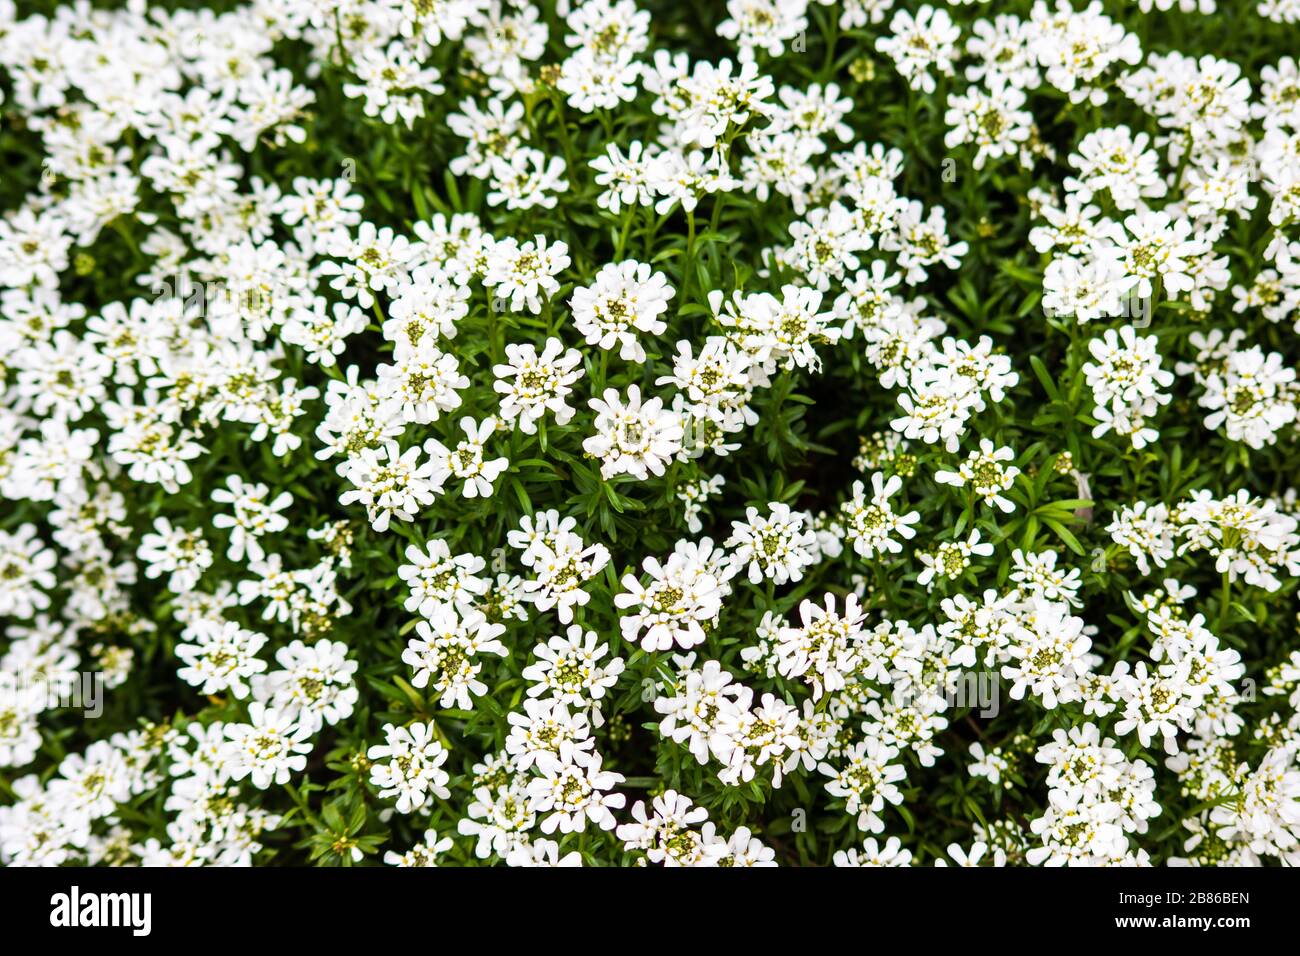 White flowers of Candytuft Iberis sempervirens against their green leaves Stock Photo